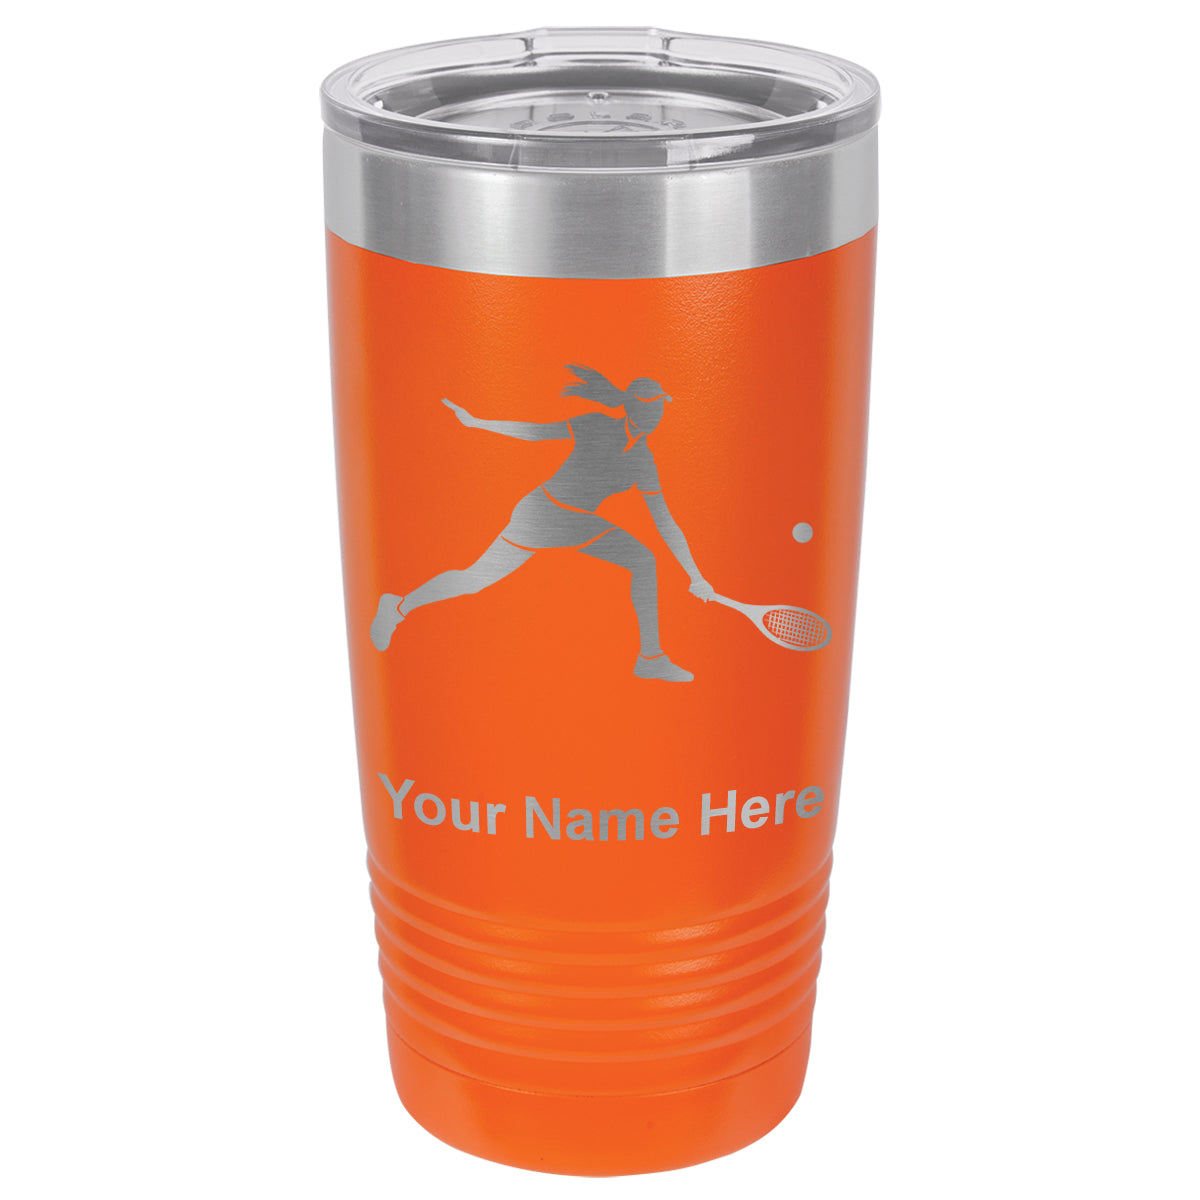 20oz Vacuum Insulated Tumbler Mug, Tennis Player Woman, Personalized Engraving Included